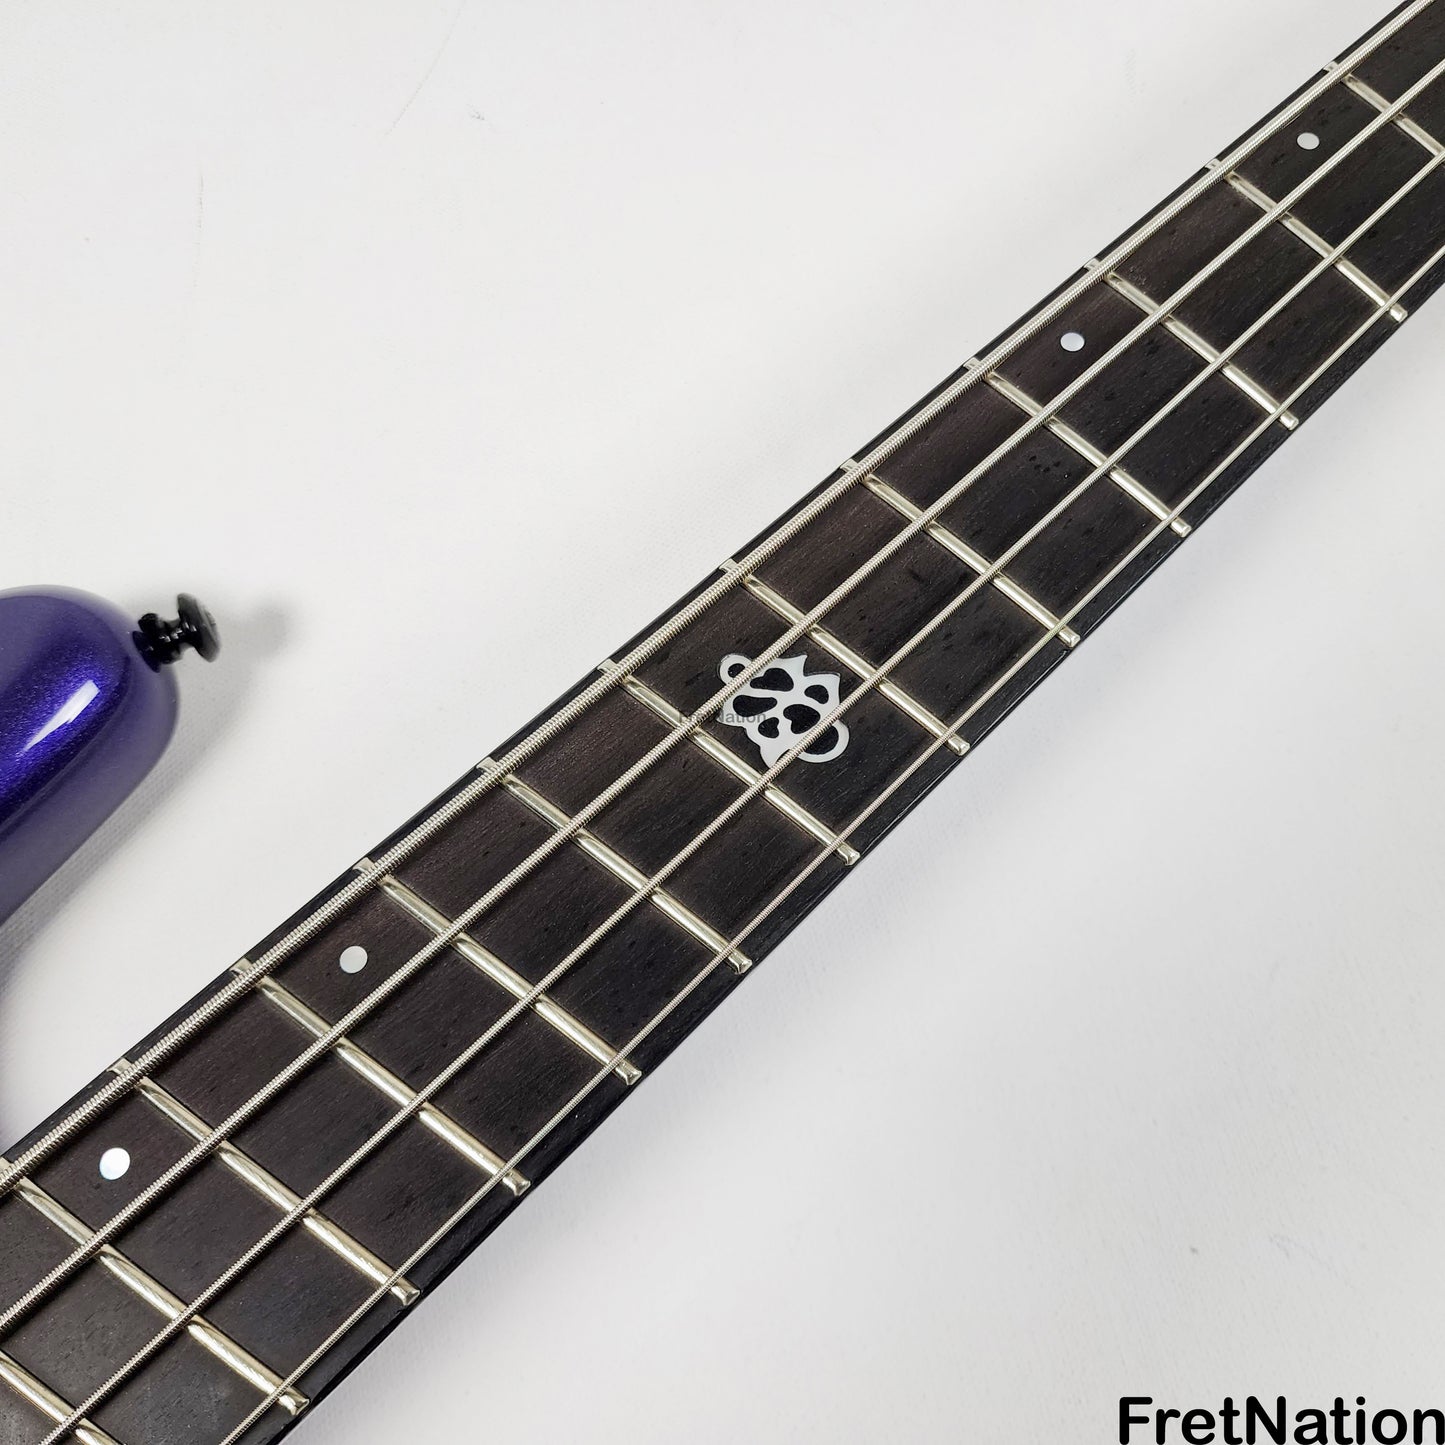 Spector Spector NS Dimensions 4-String Multi-Scale Bass - Plum Crazy 8.94lbs W230443 DEMO